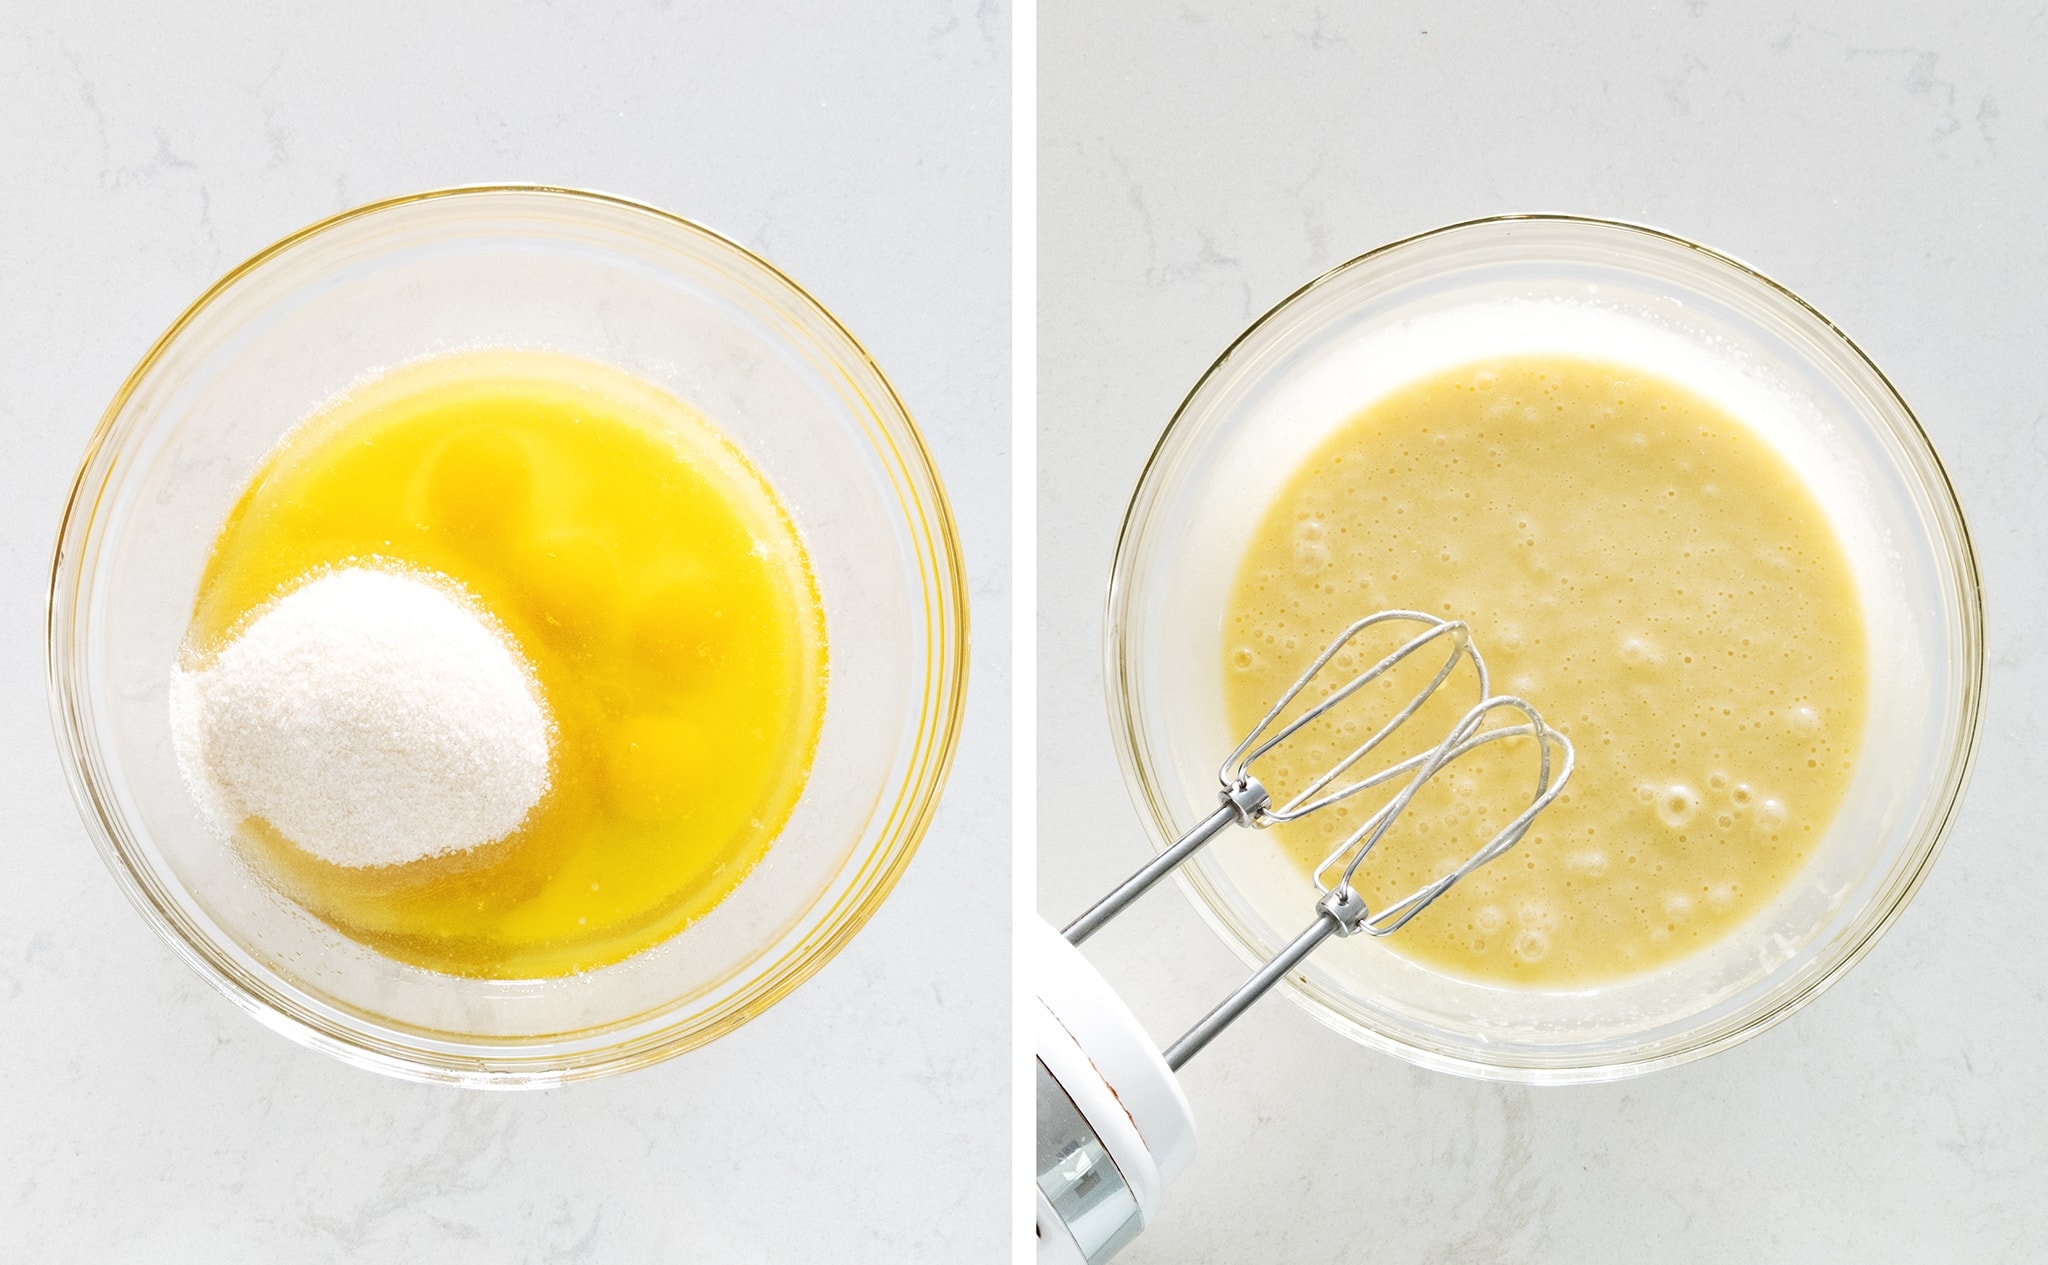 Mixing eggs and sugar in a bowl